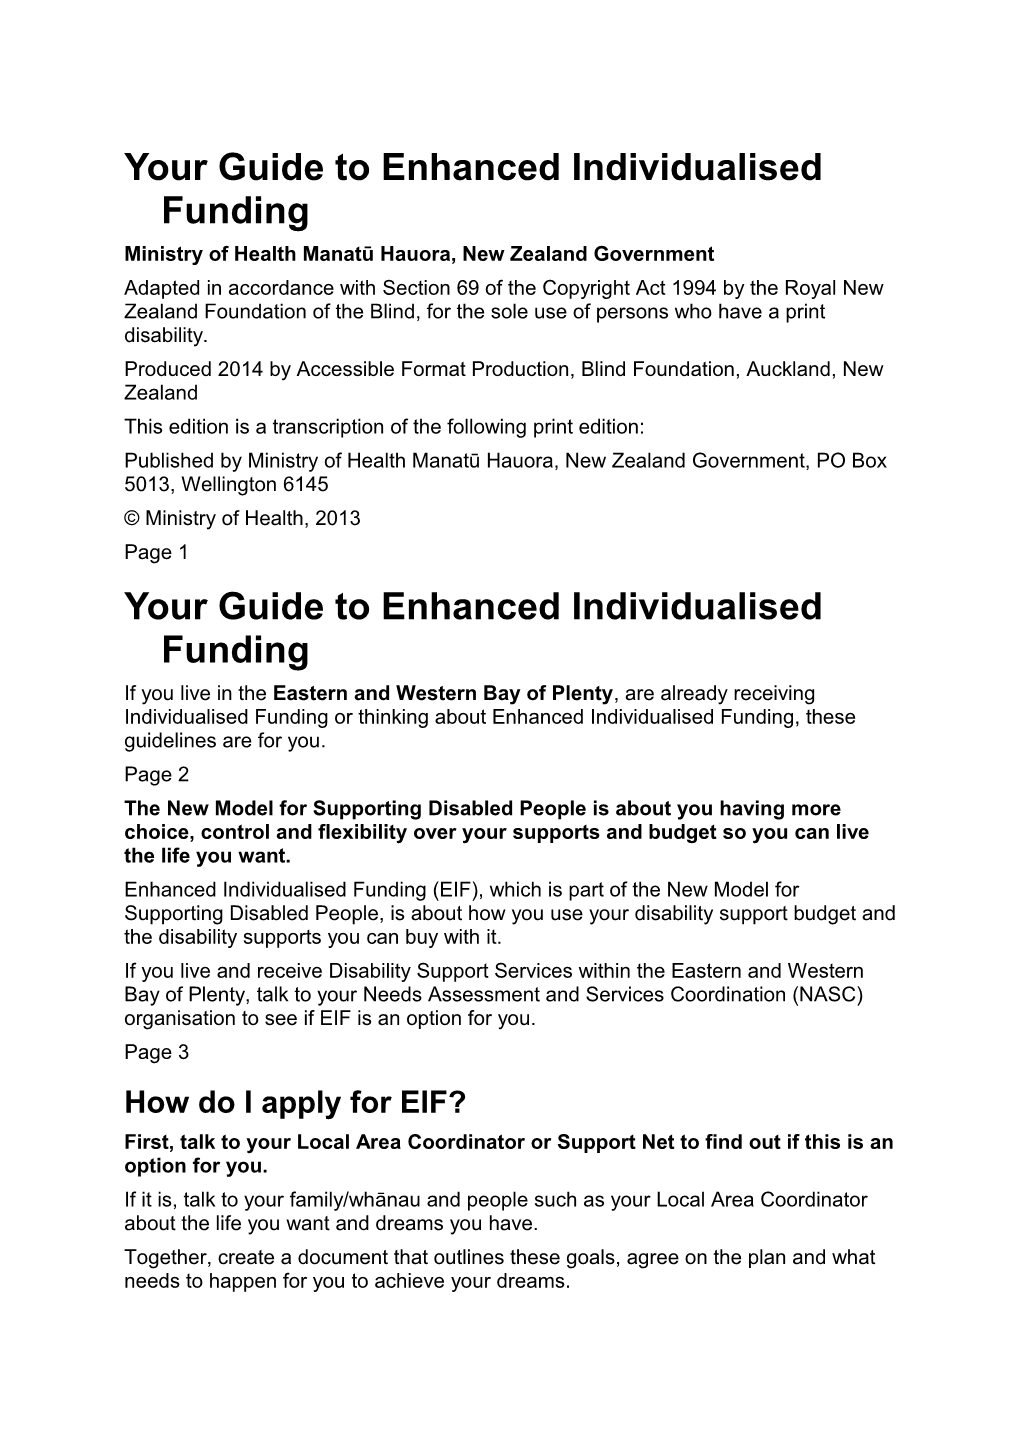 Your Guide to Enhanced Individualised Funding